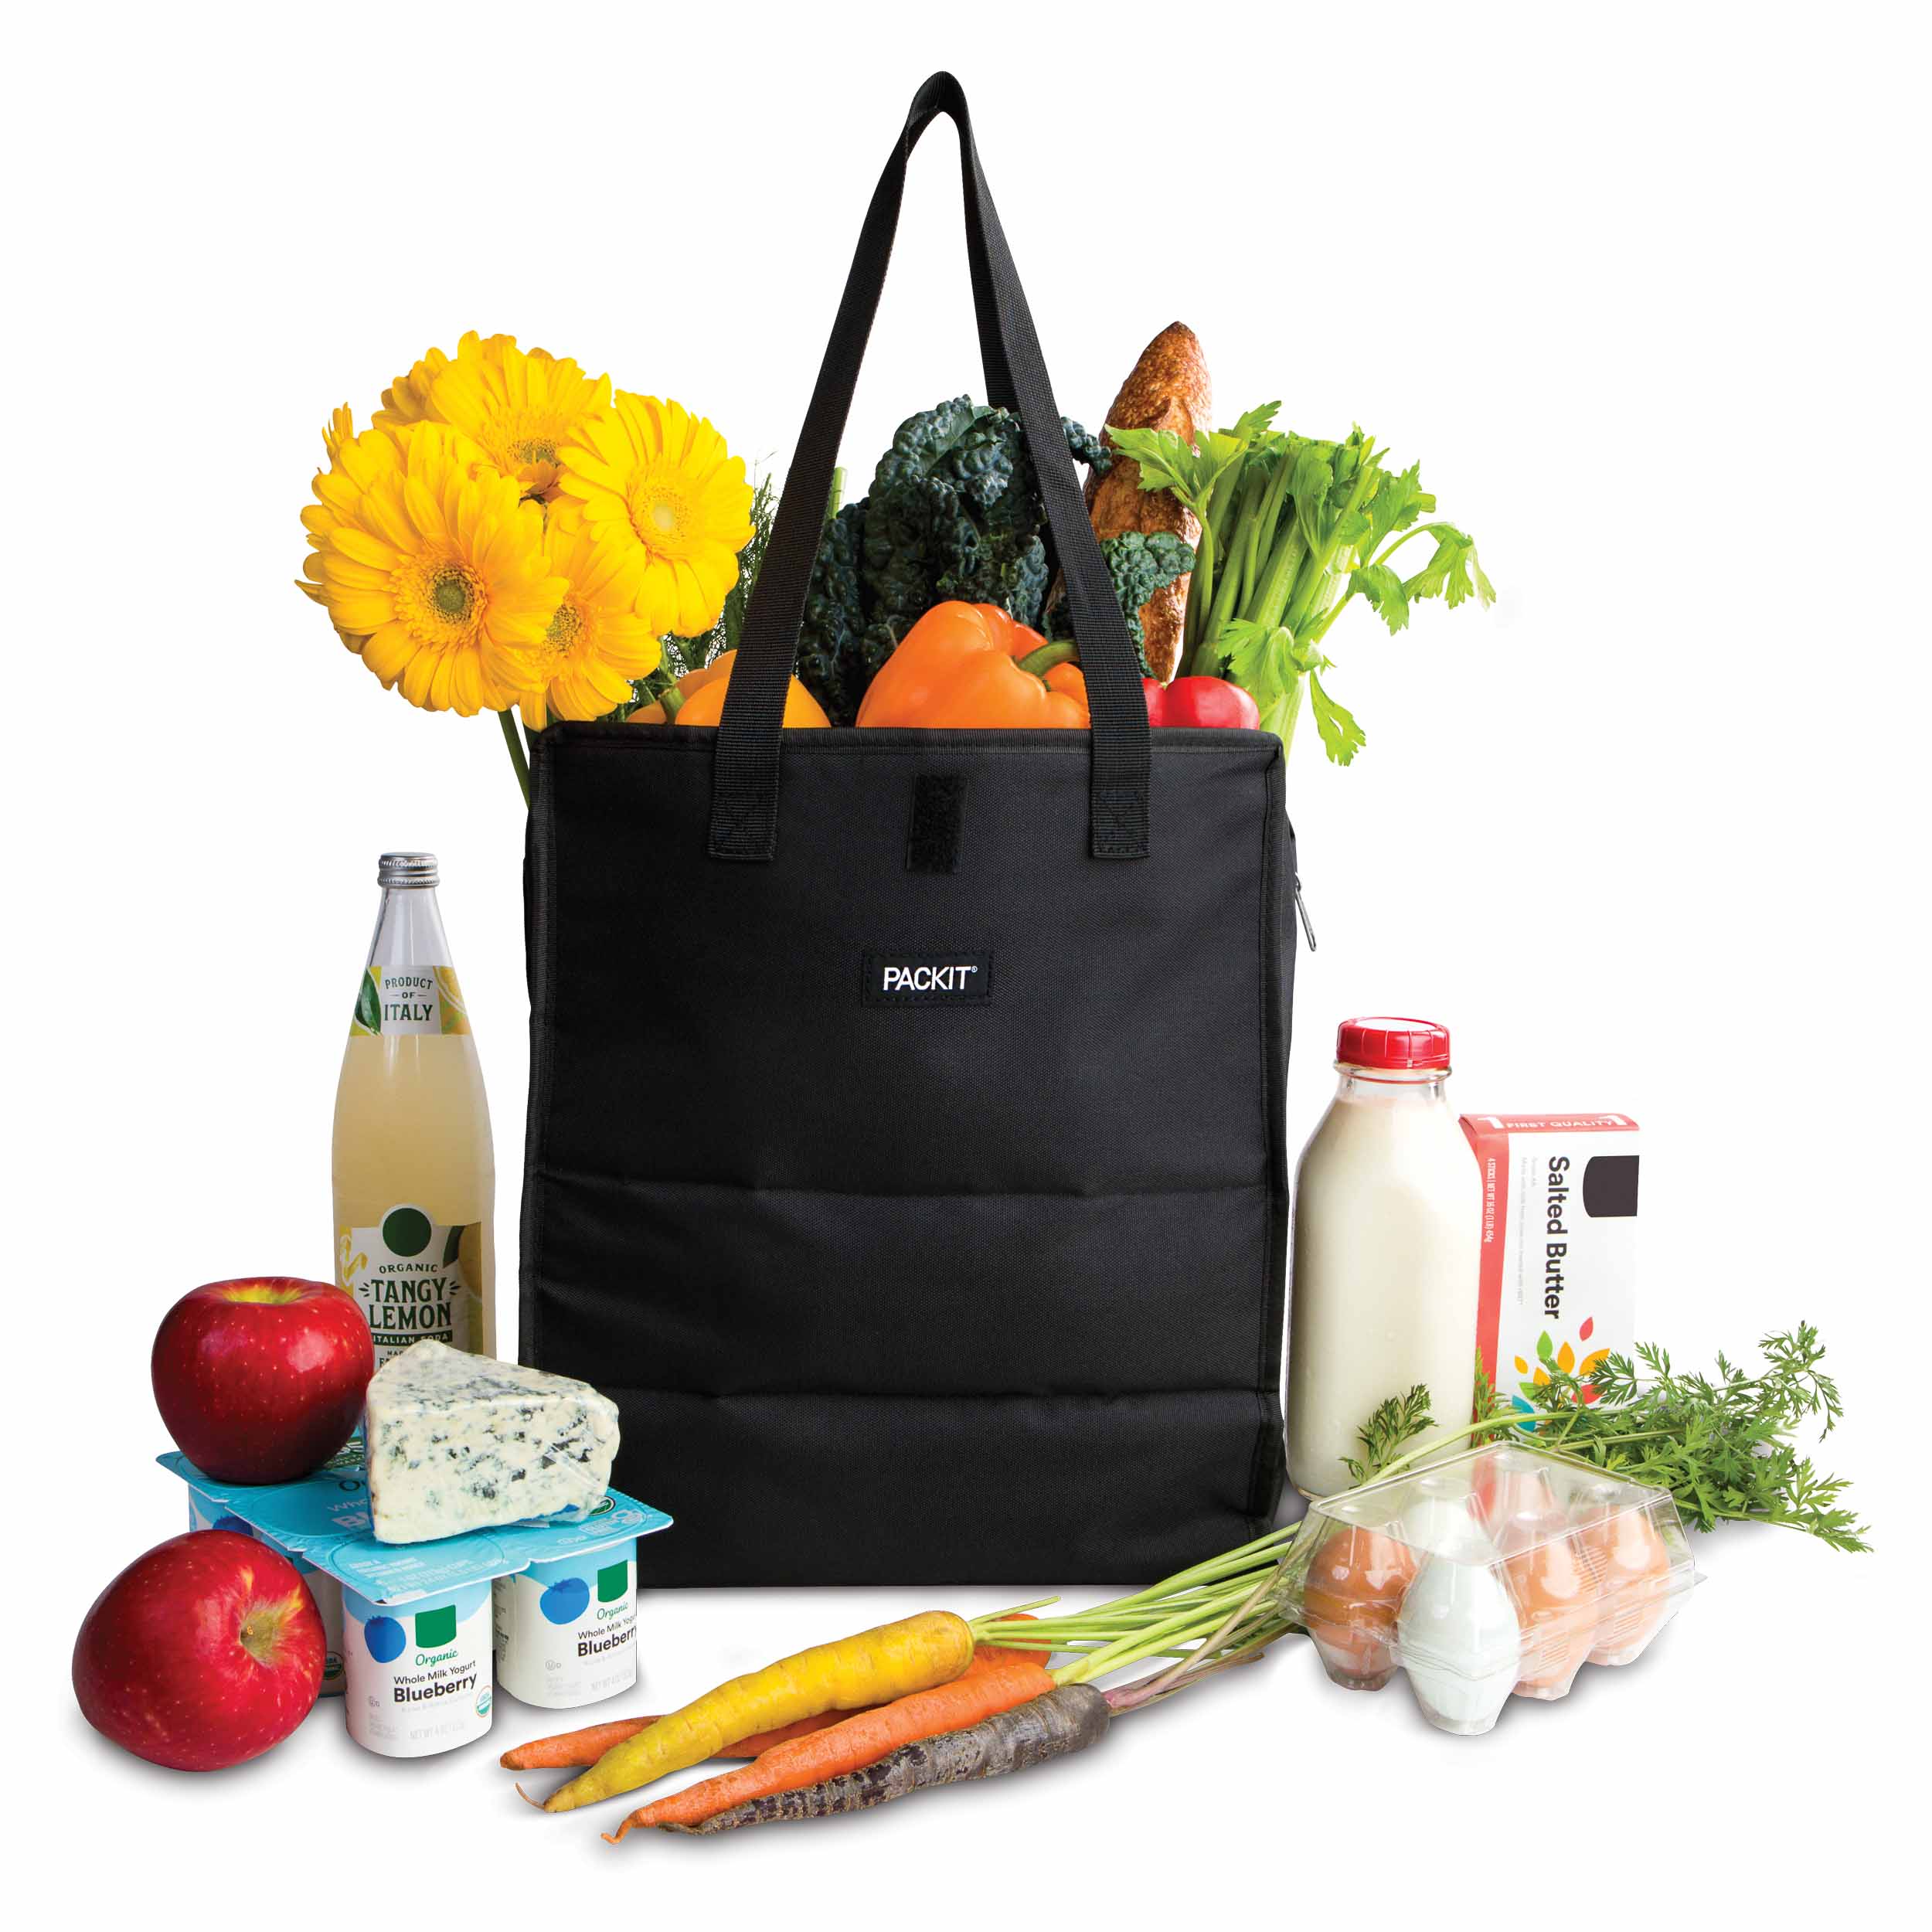 Freezable-Gorcery-Tote-FInals_0000_Freezable-Grocery-Tote-Black-Front-Food-Combo-Straps-Up-Lores.jpg